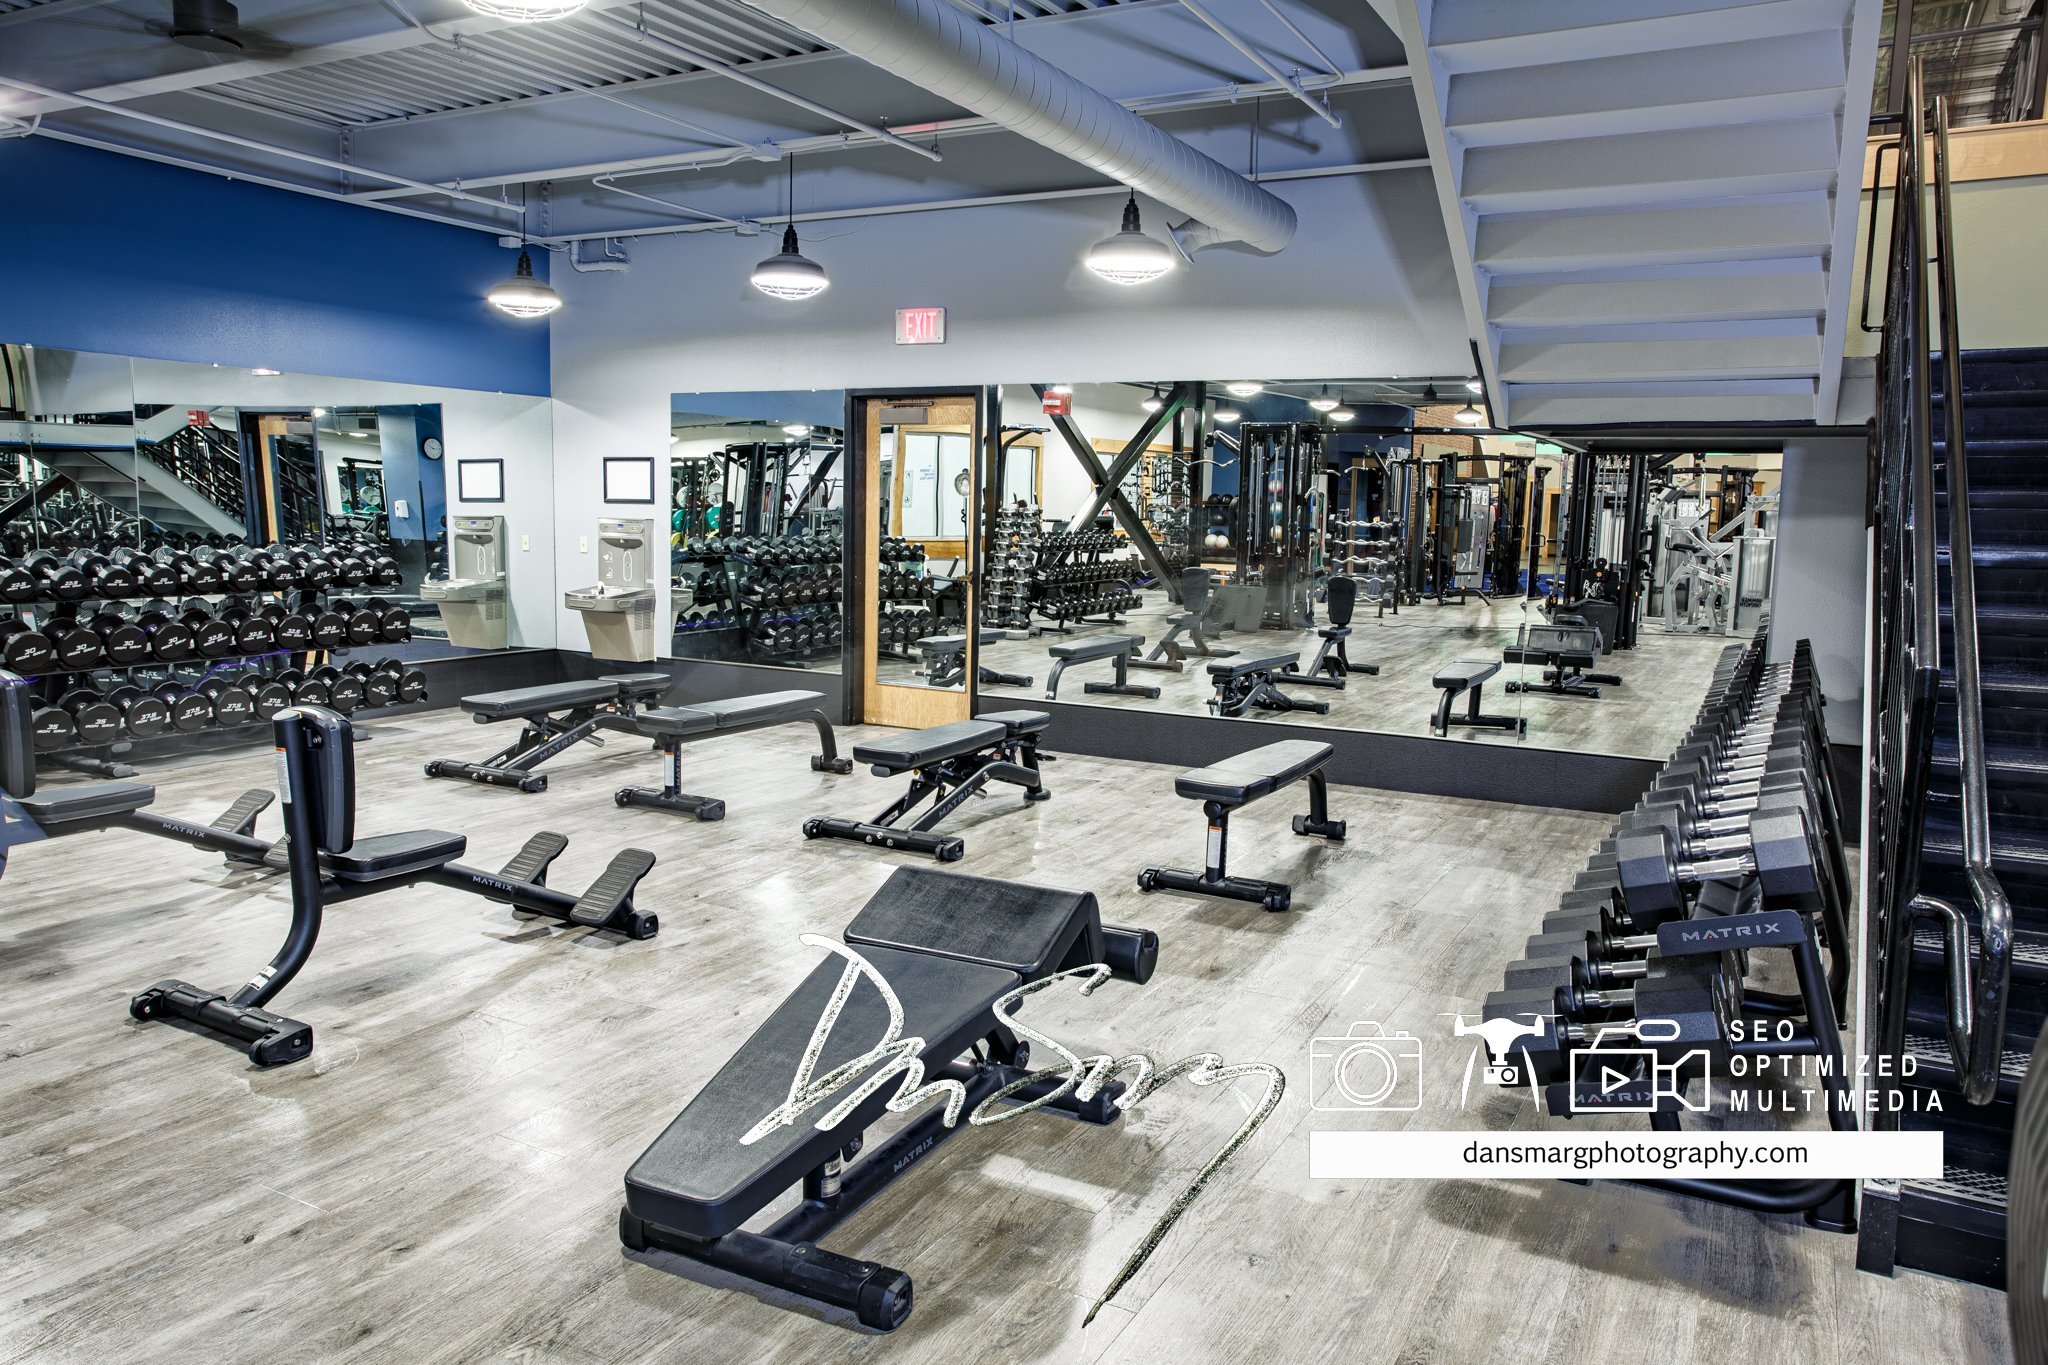 DanSmargPhotography.com-SEO-Optimmized-Multimedia-Content-The-Wave-Fitness-Center-Whitefish-Montana-18.jpg